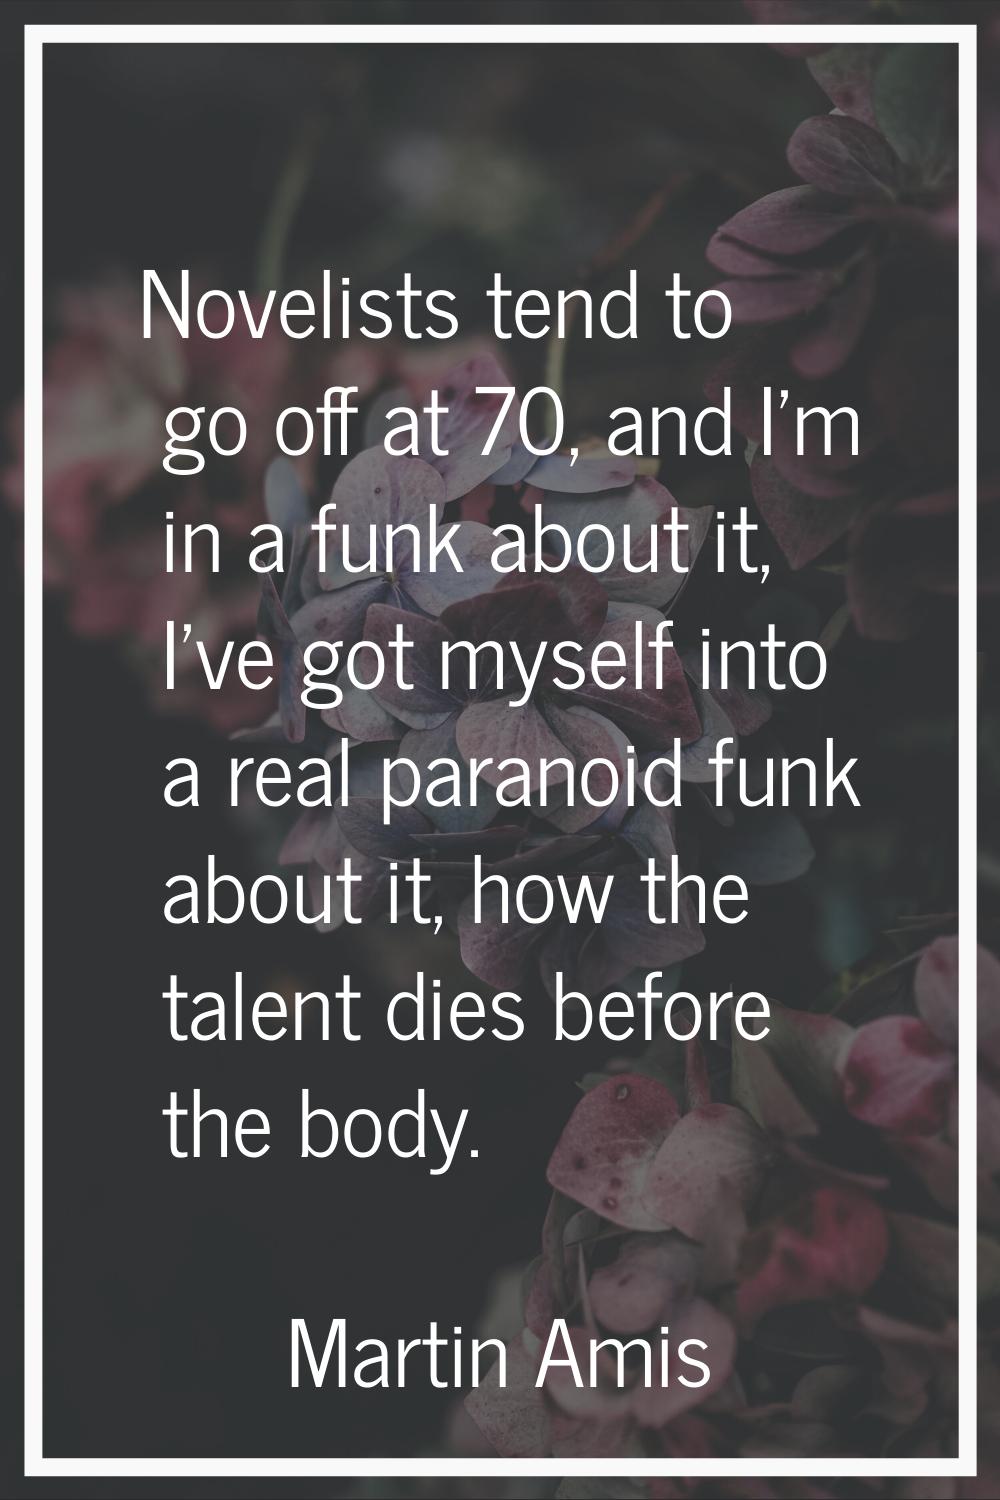 Novelists tend to go off at 70, and I'm in a funk about it, I've got myself into a real paranoid fu